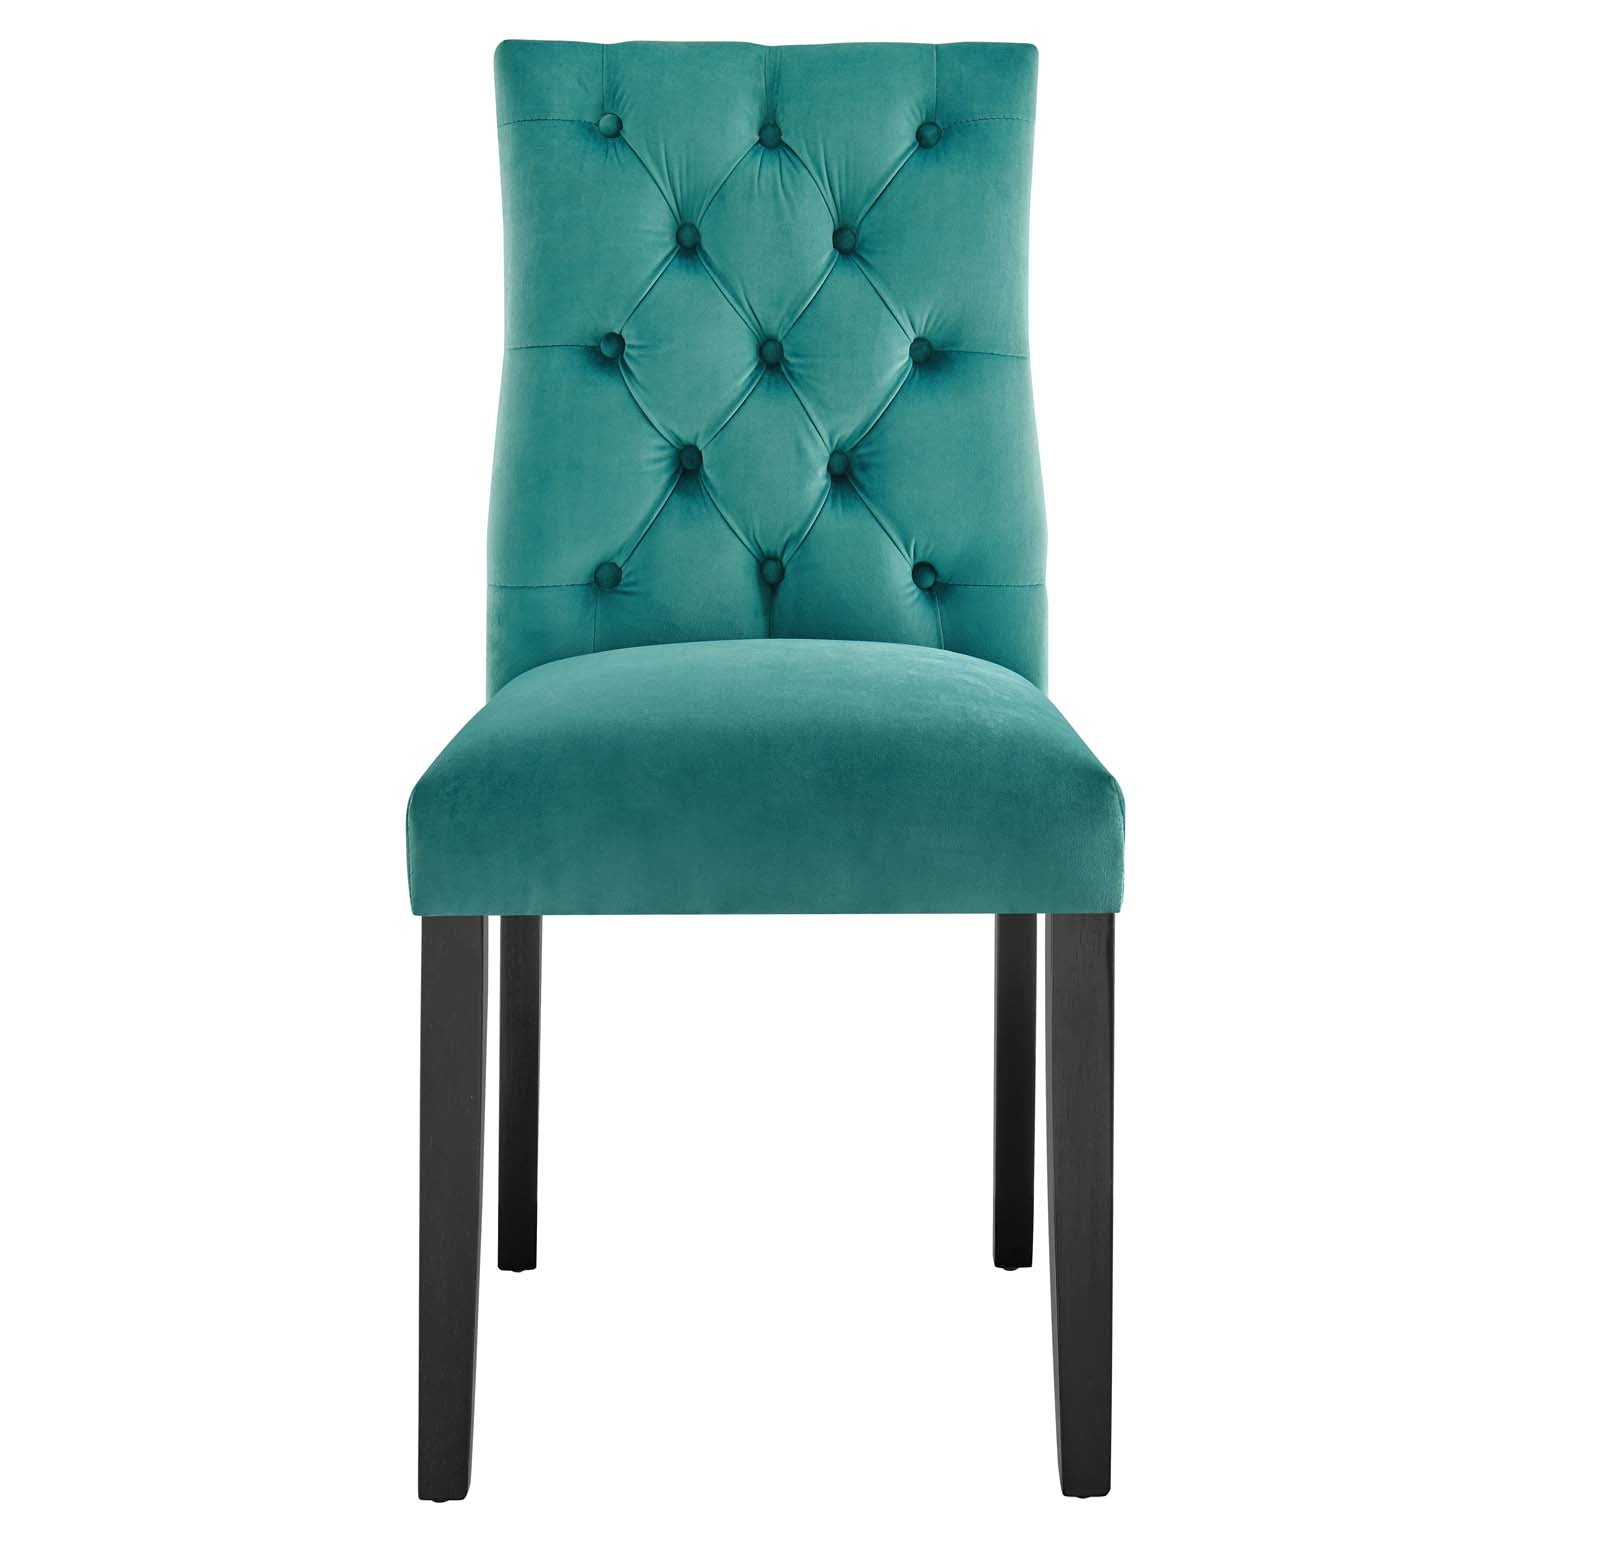 Modway Dining Chairs - Duchess Performance Velvet Dining Chairs - Set of 2 Teal